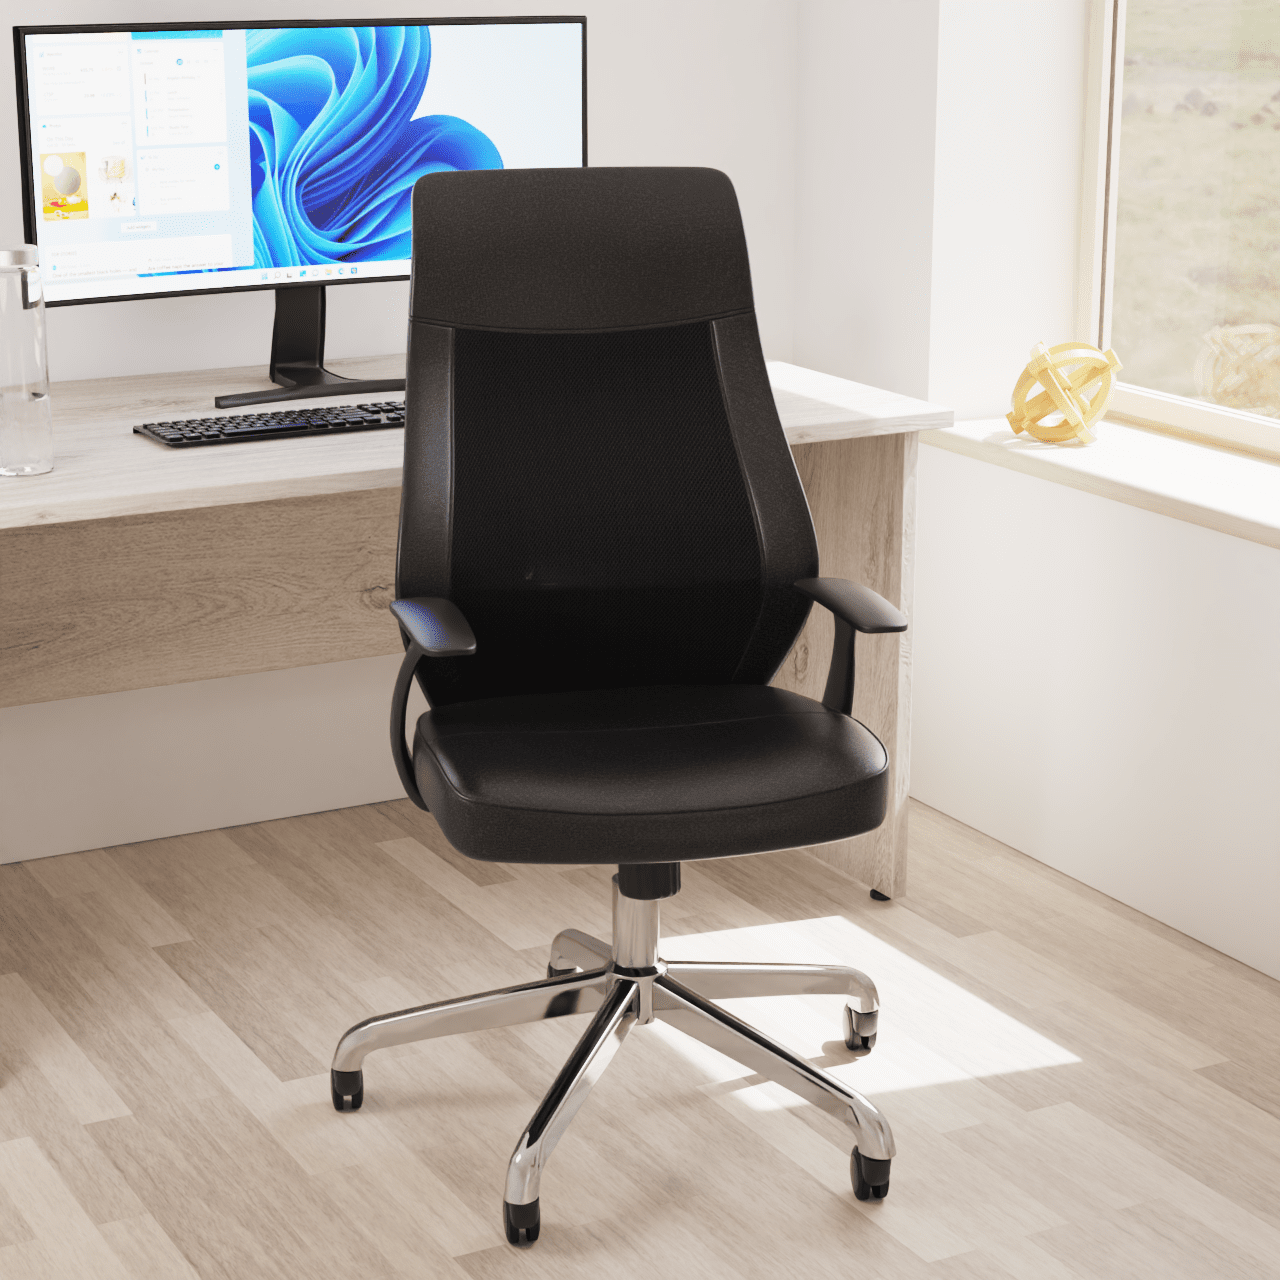 Baye High Mesh Back Task Operator Chair - Black Leather, Chrome Metal Frame, Fixed Arms, Lumbar Support, 110kg Capacity, 8hr Usage - Office/Home